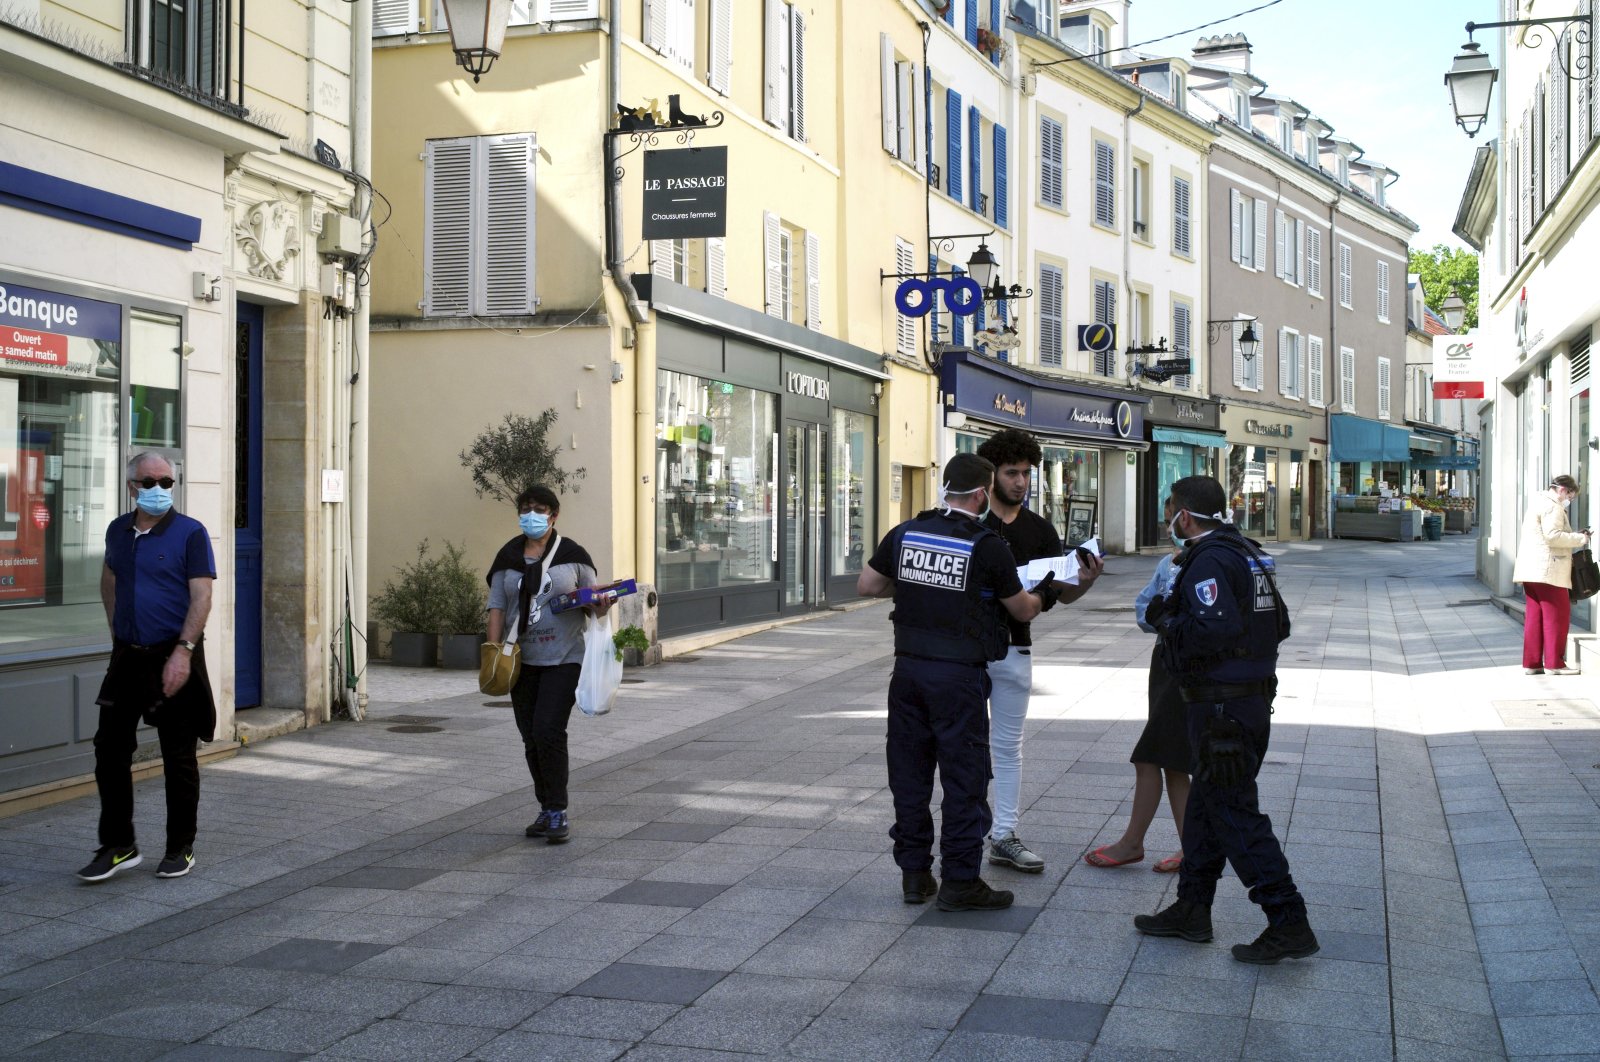 Municipal police officers check documents as they patrol in a street of Sceaux during nationwide confinement measures to counter the COVID-19, in Sceaux, south of Paris, Wednesday, April 8, 2020 (AP Photo)